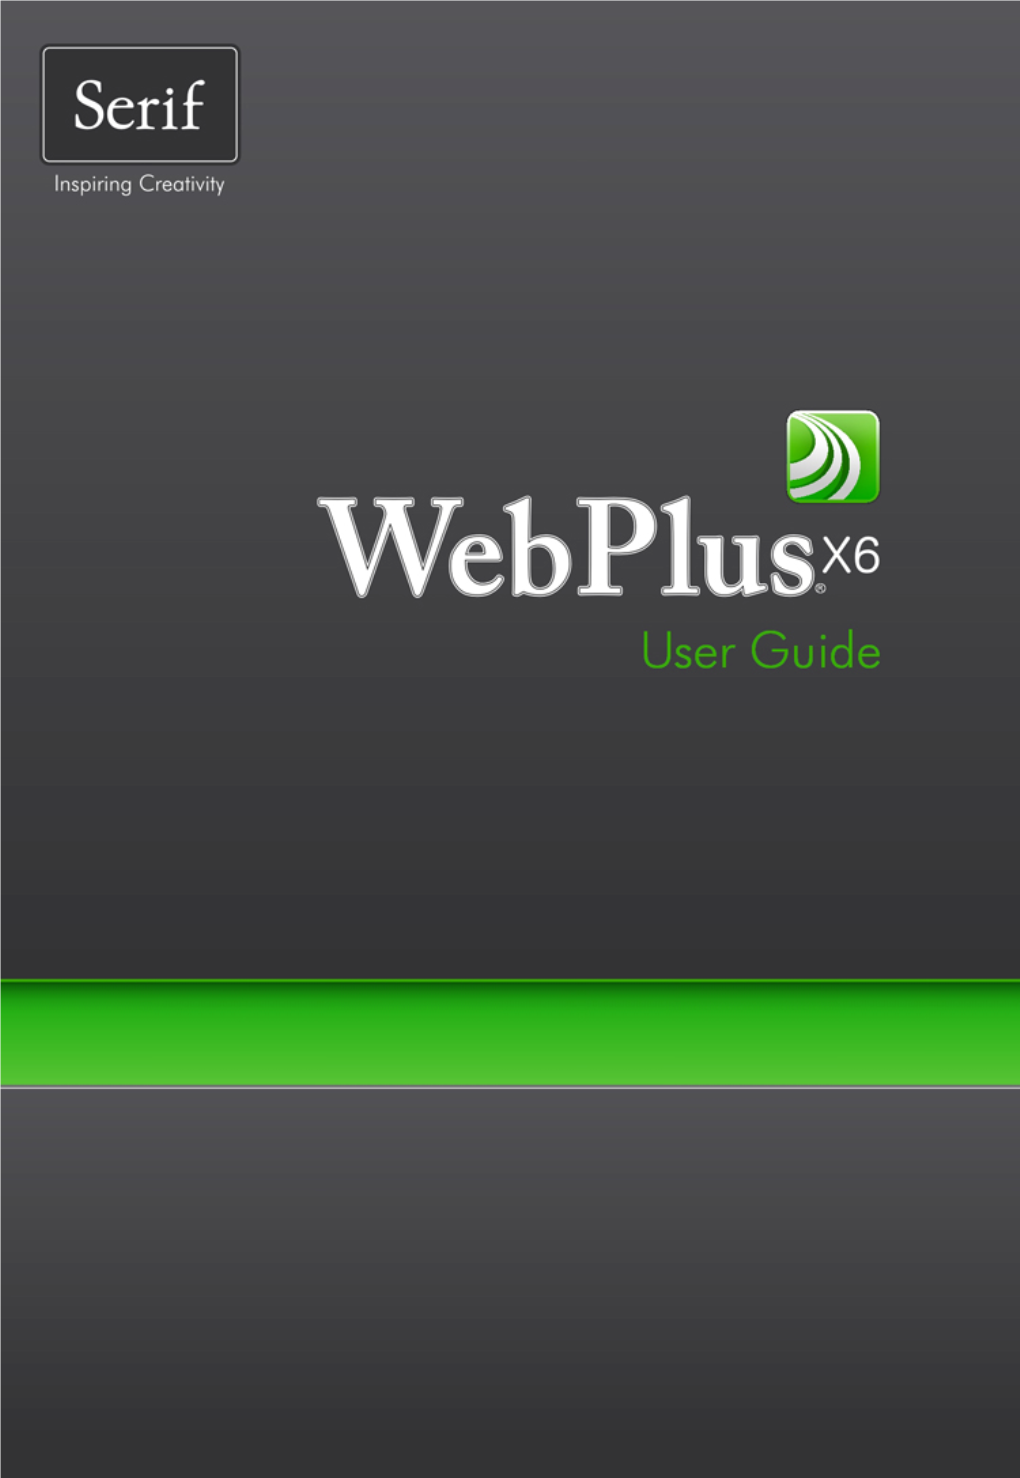 Webplus X6 User Guide Is Provided for the New Or Inexperienced User to Get the Very Best out of Webplus